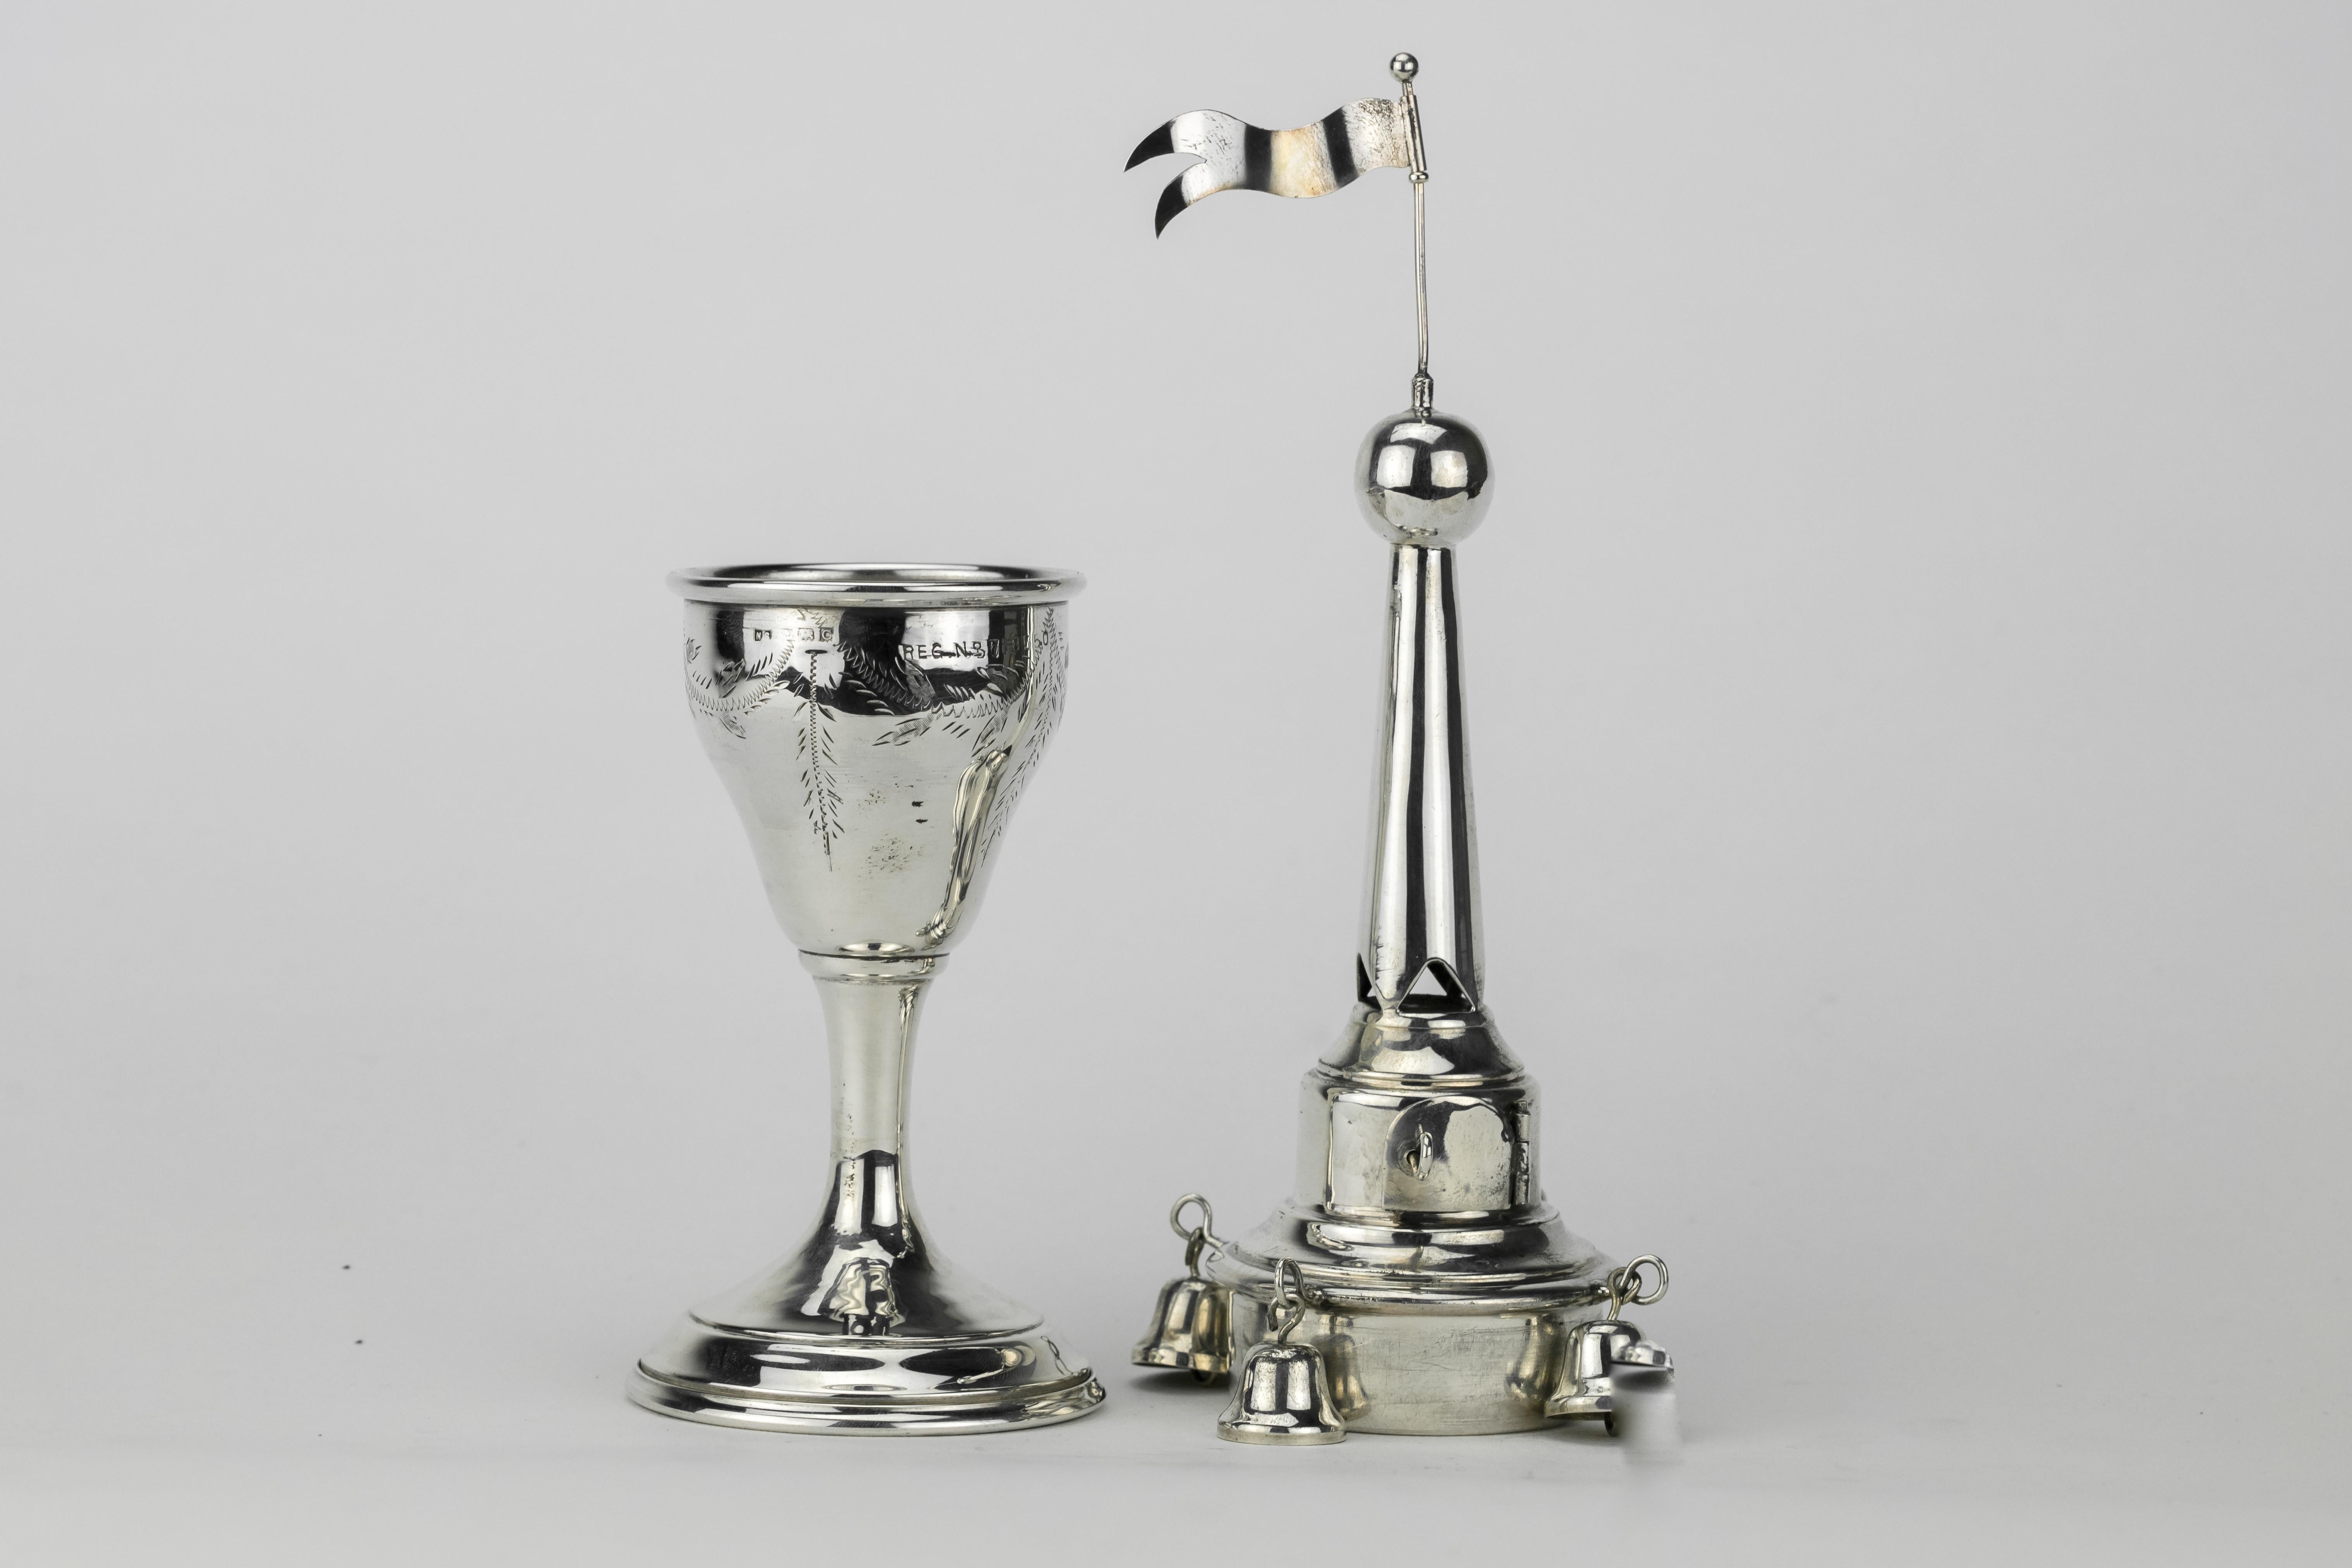 Unusual sterling silver combined spice box and Kiddush goblet by Nathan Shore, London, England, 1958. The goblet with an elegant stem, on round base, is engraved with leaves around the cup, the spice container with hinged door is decorated with four